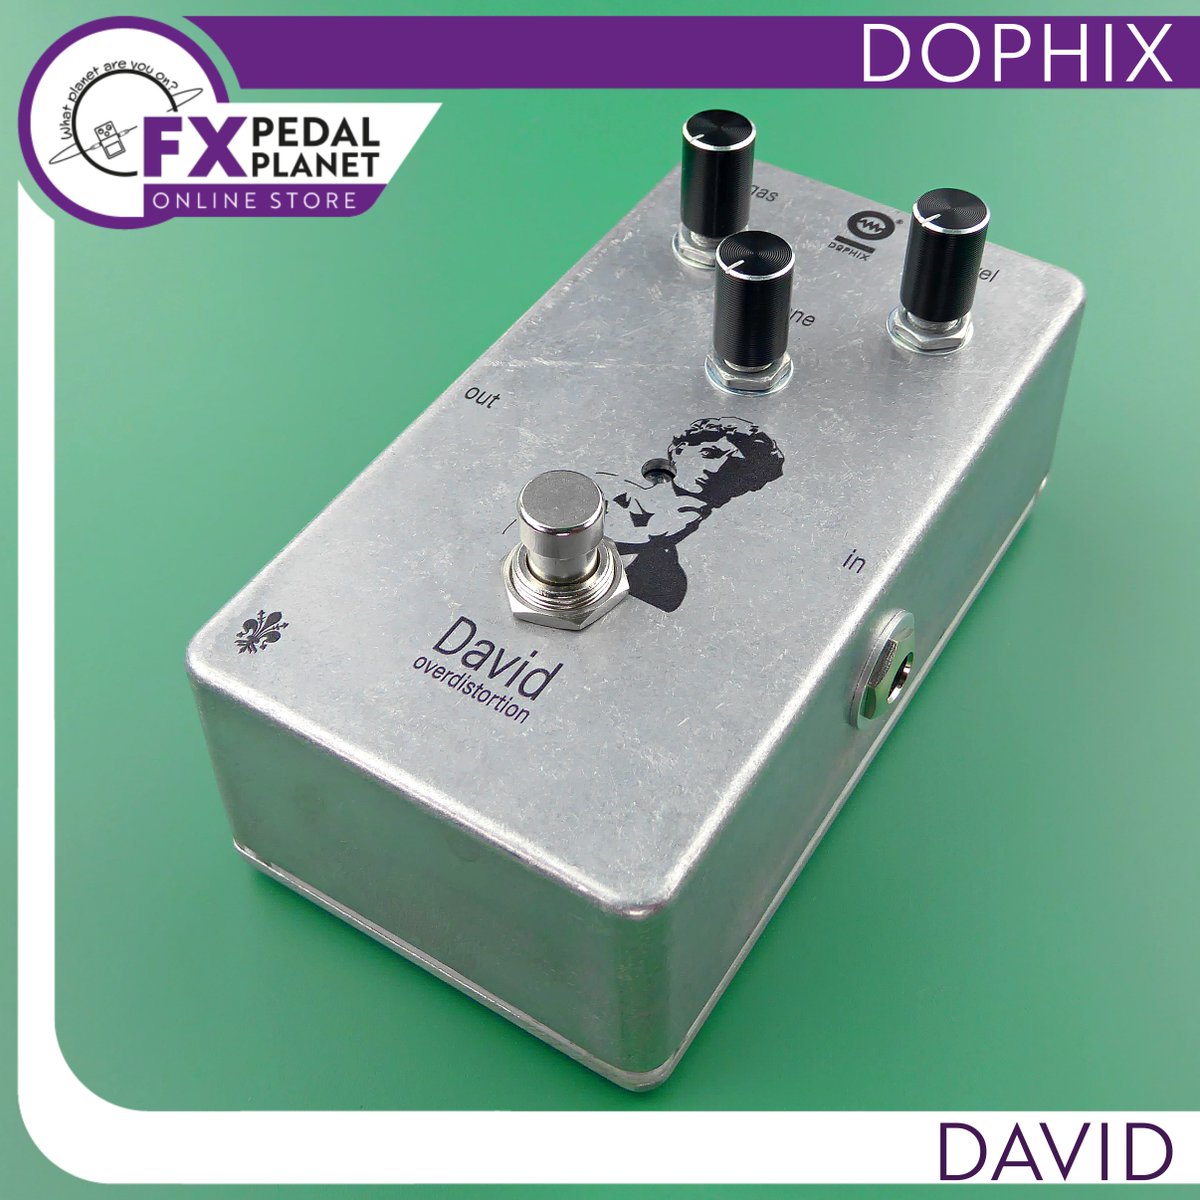 Introducing the David by Dophix, a premium overdrive and distortion pedal renowned for its rich warmth and distinctive character. #FXPedalPlanetOnlineStore #Dophix #David #Overdrive #Distortion #EffectsPedal